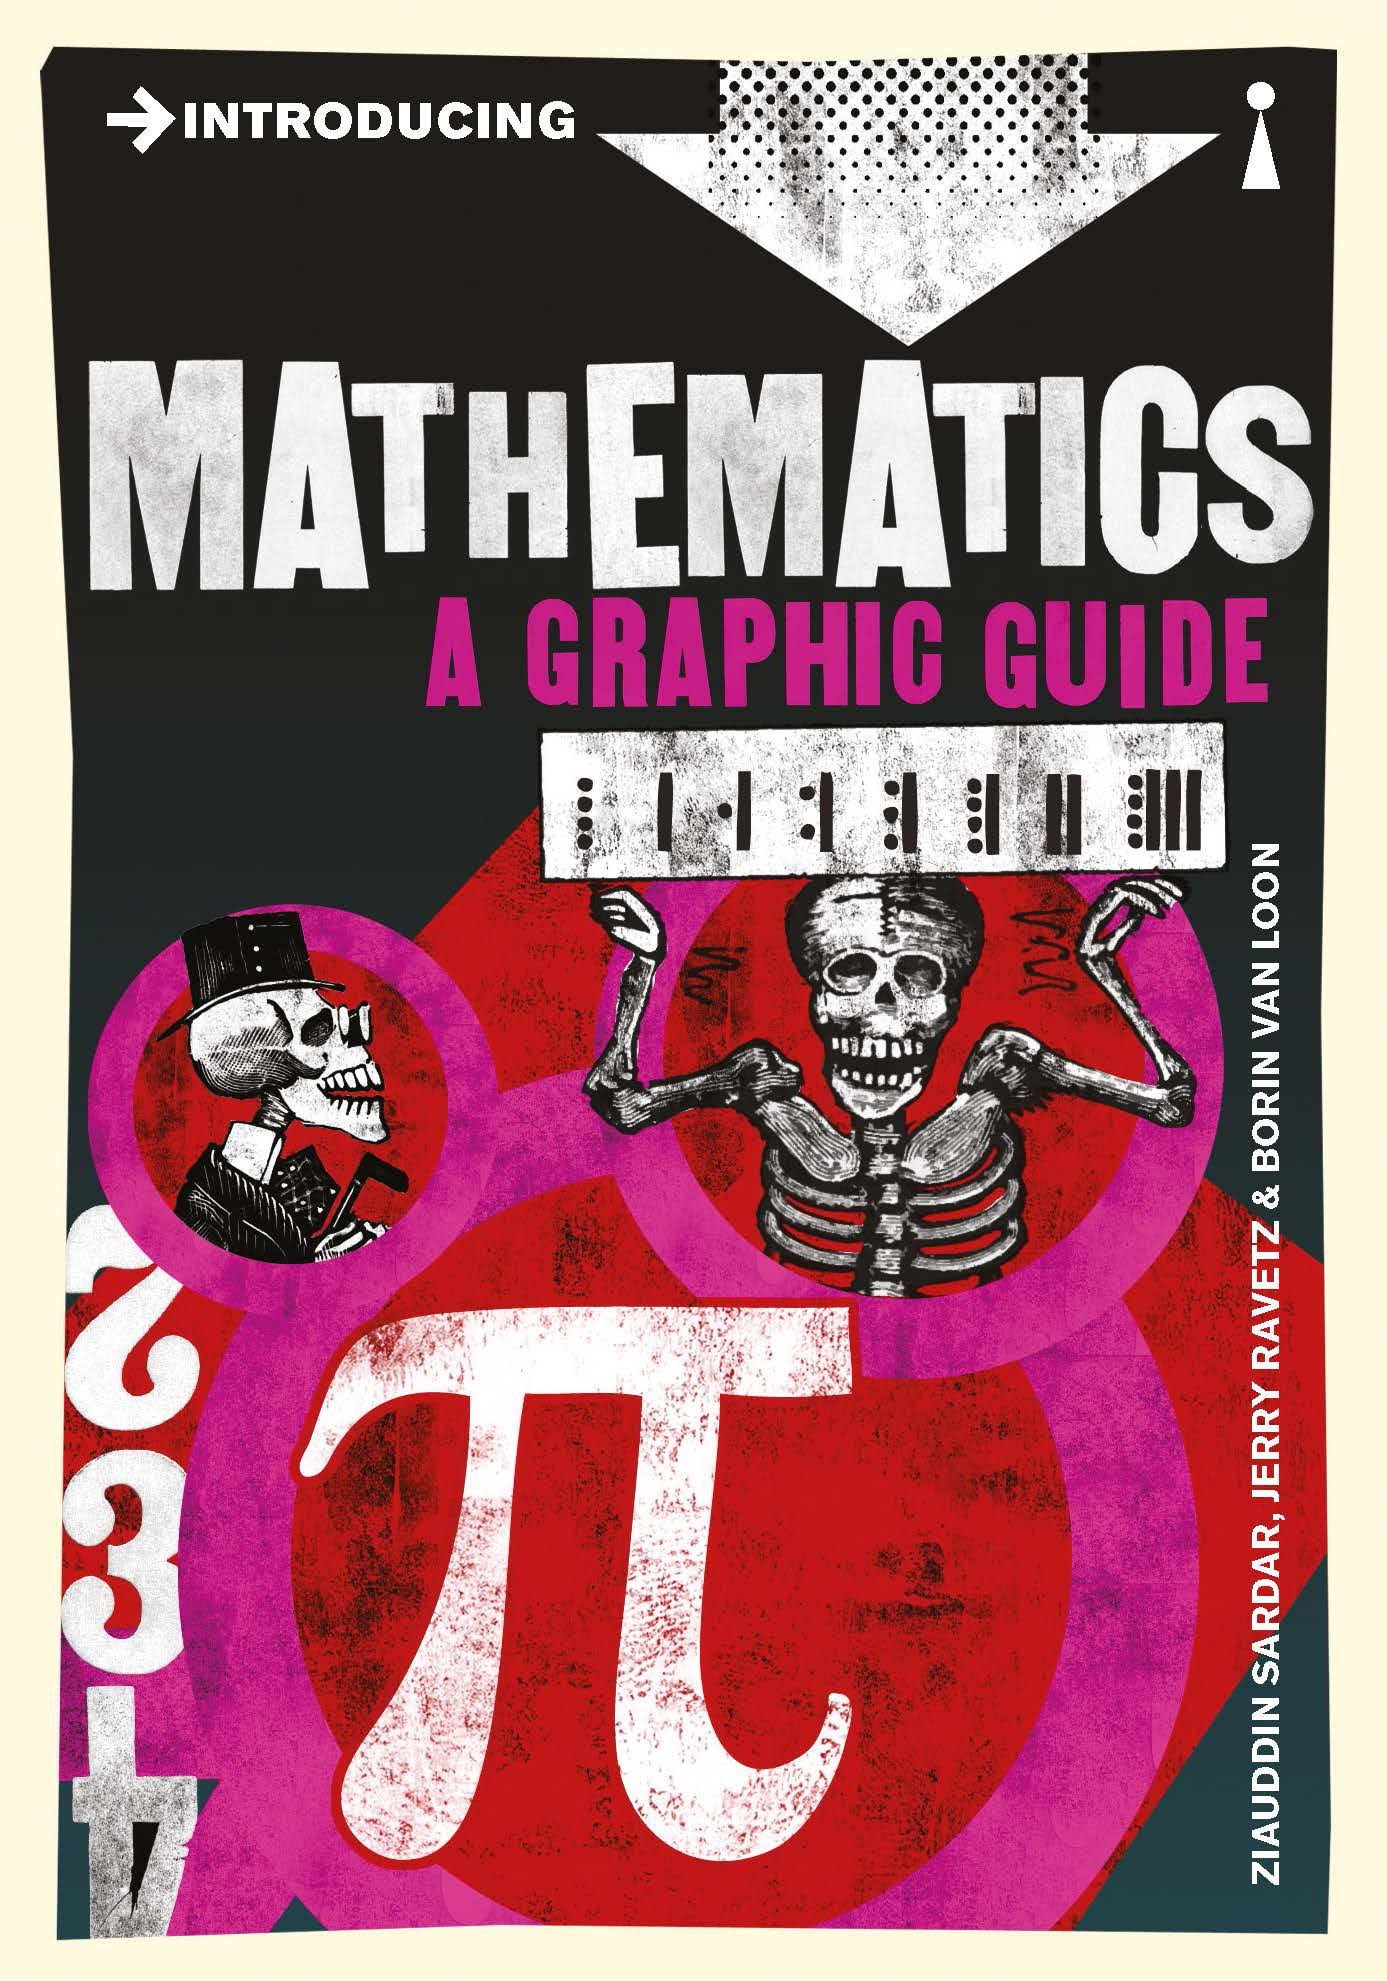 Introducing Mathematics: A Graphic Guide [Book]